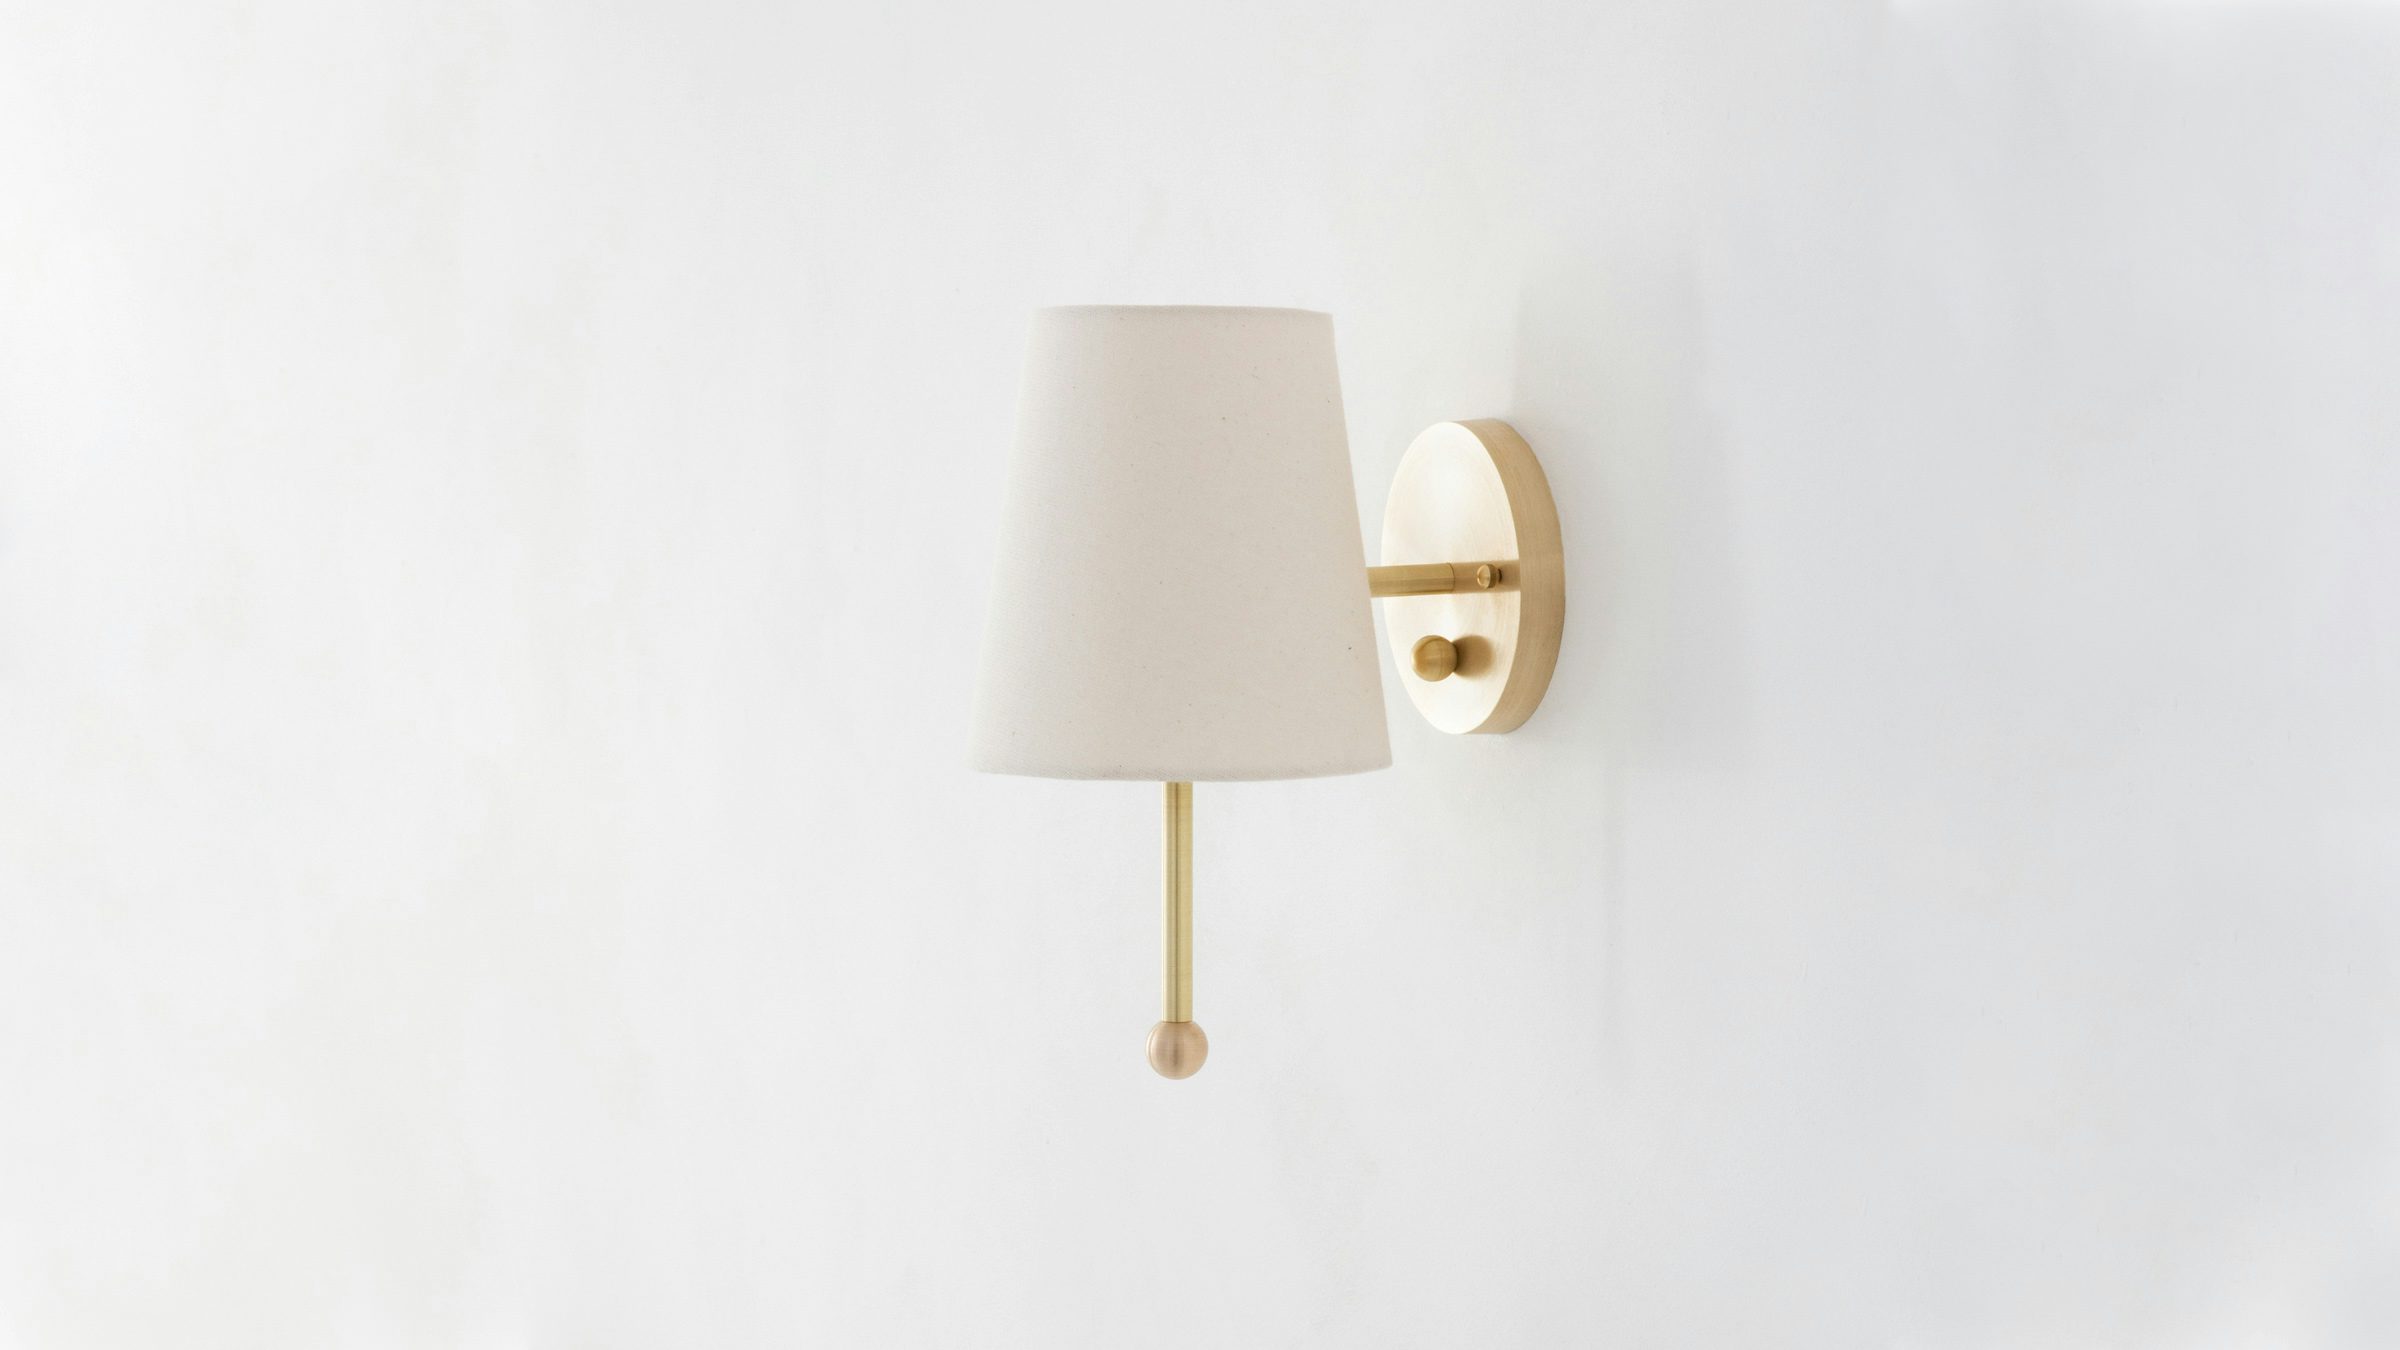 gallery image for House-Sconce_Gallery_1